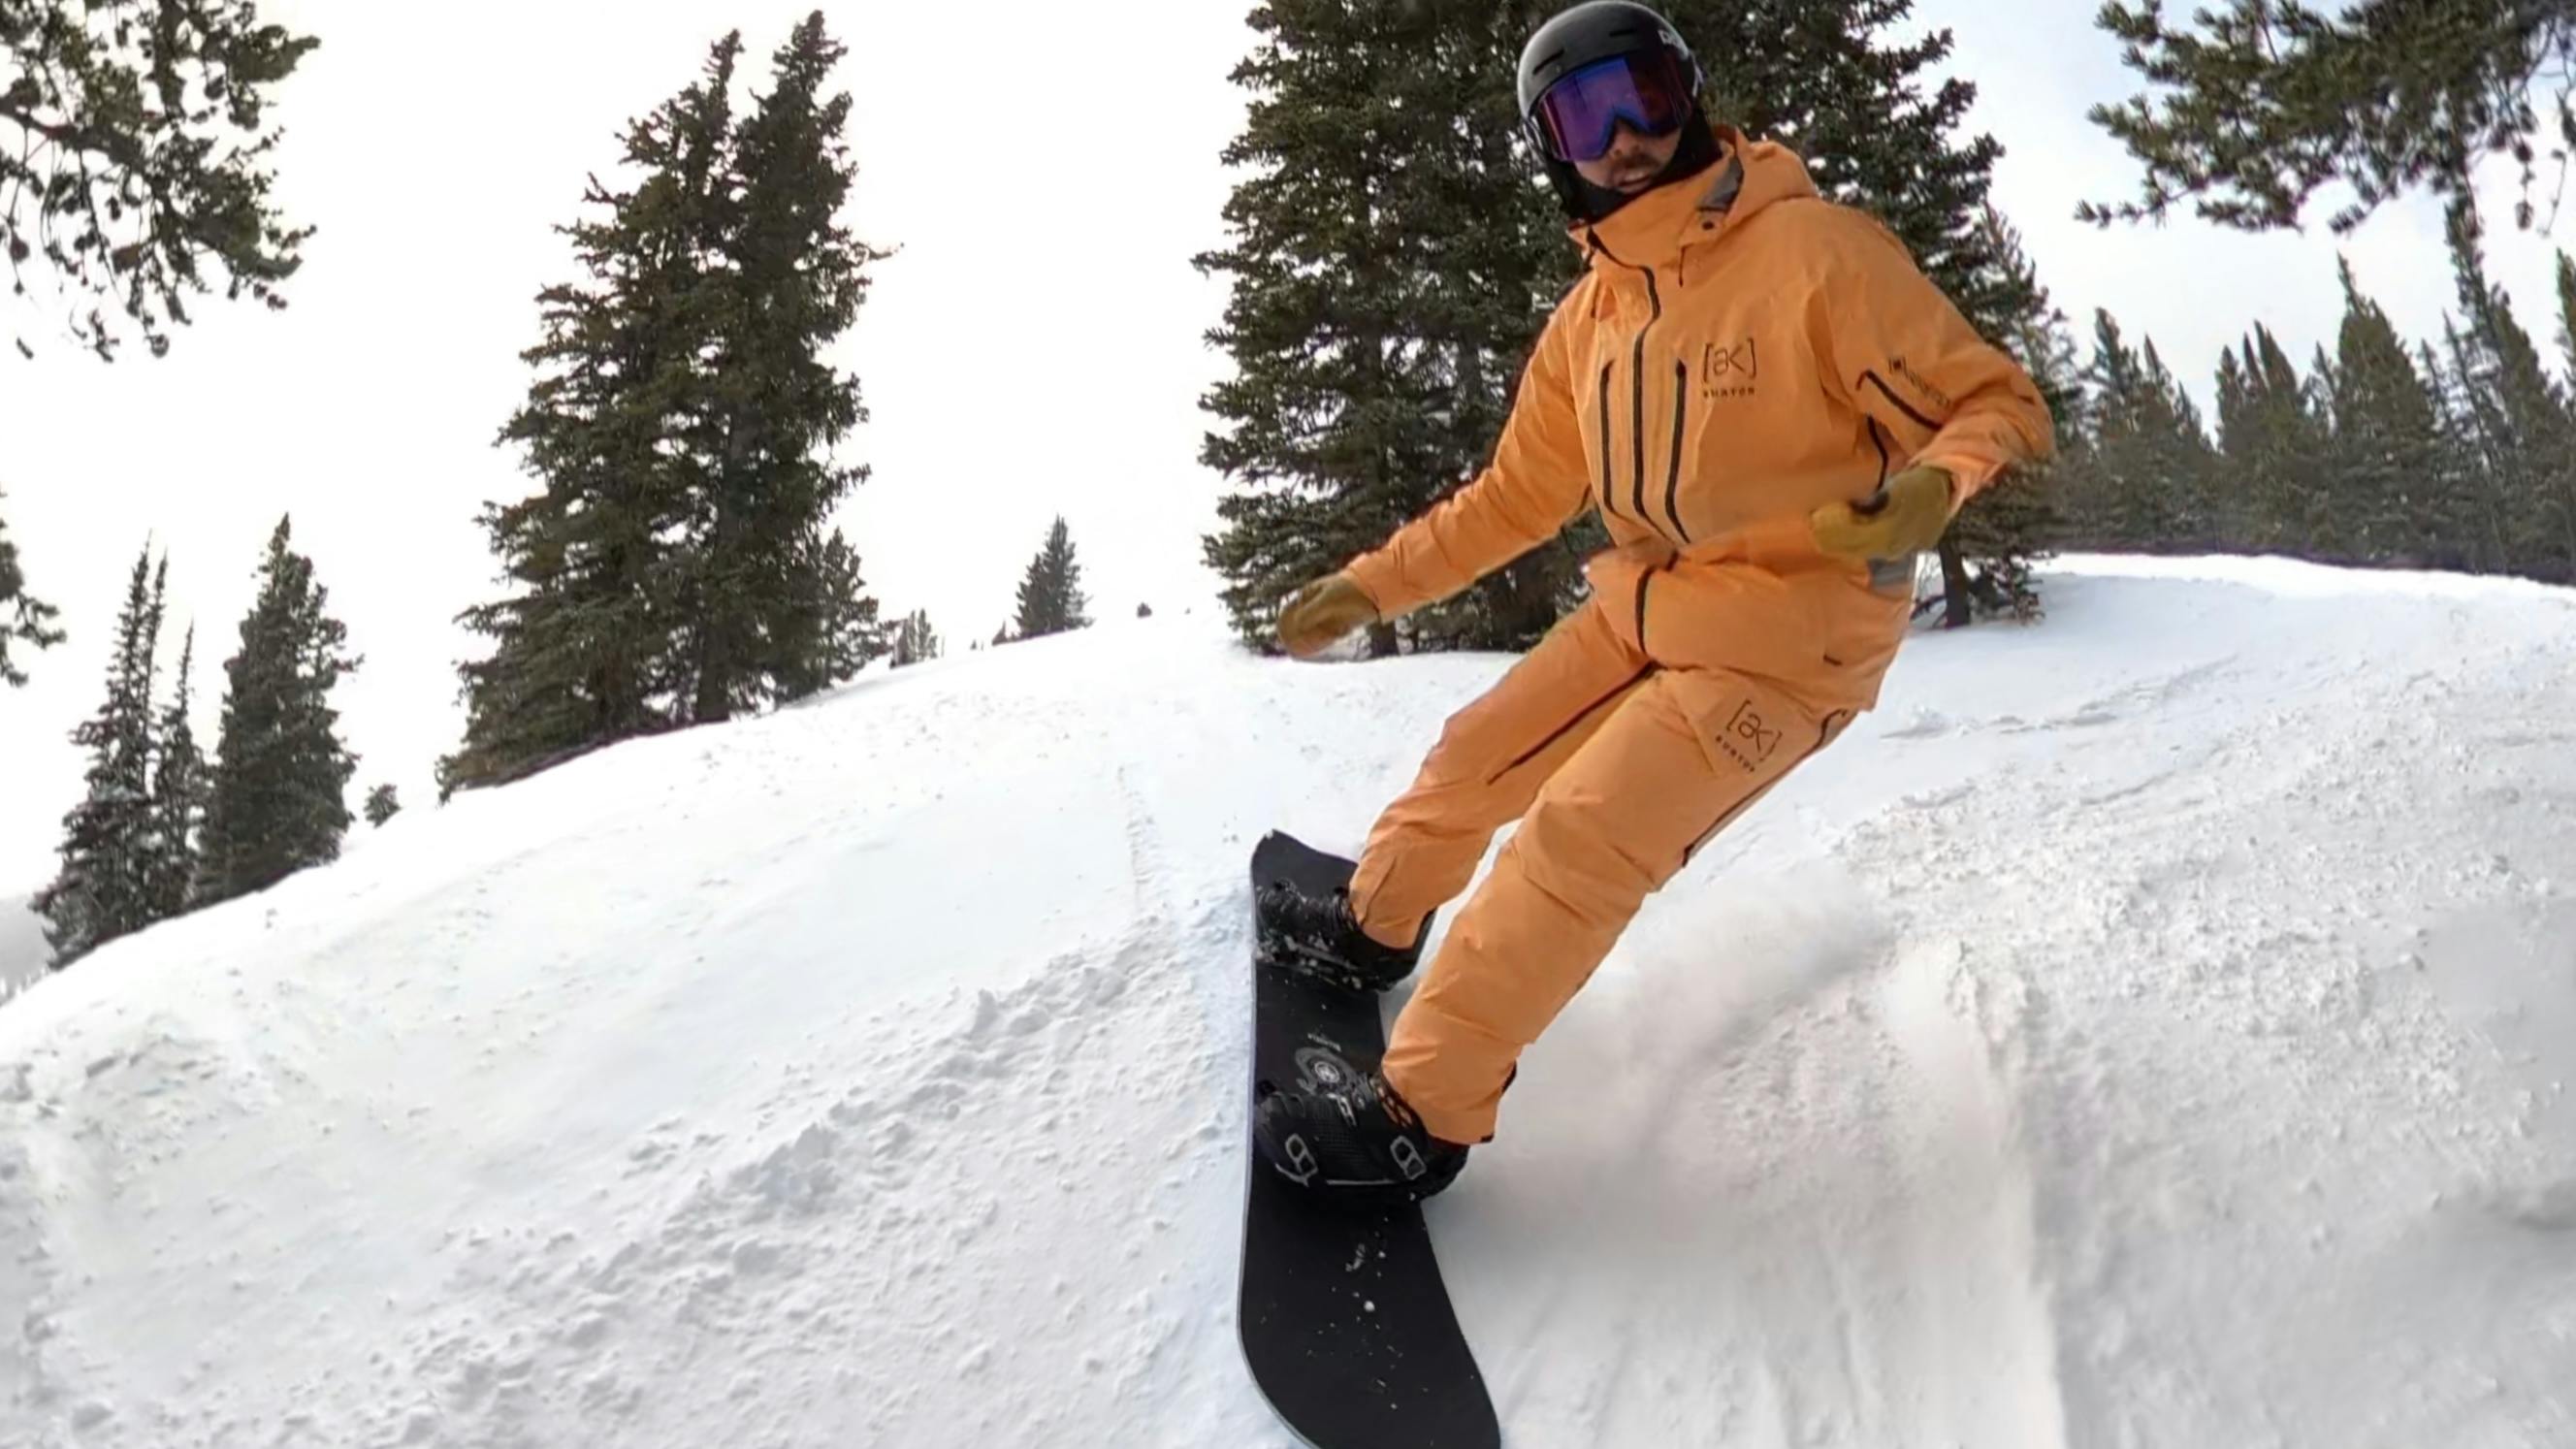 Snowboarding Expert Mike Leighton testing the Never Summer Valhalla snowboard